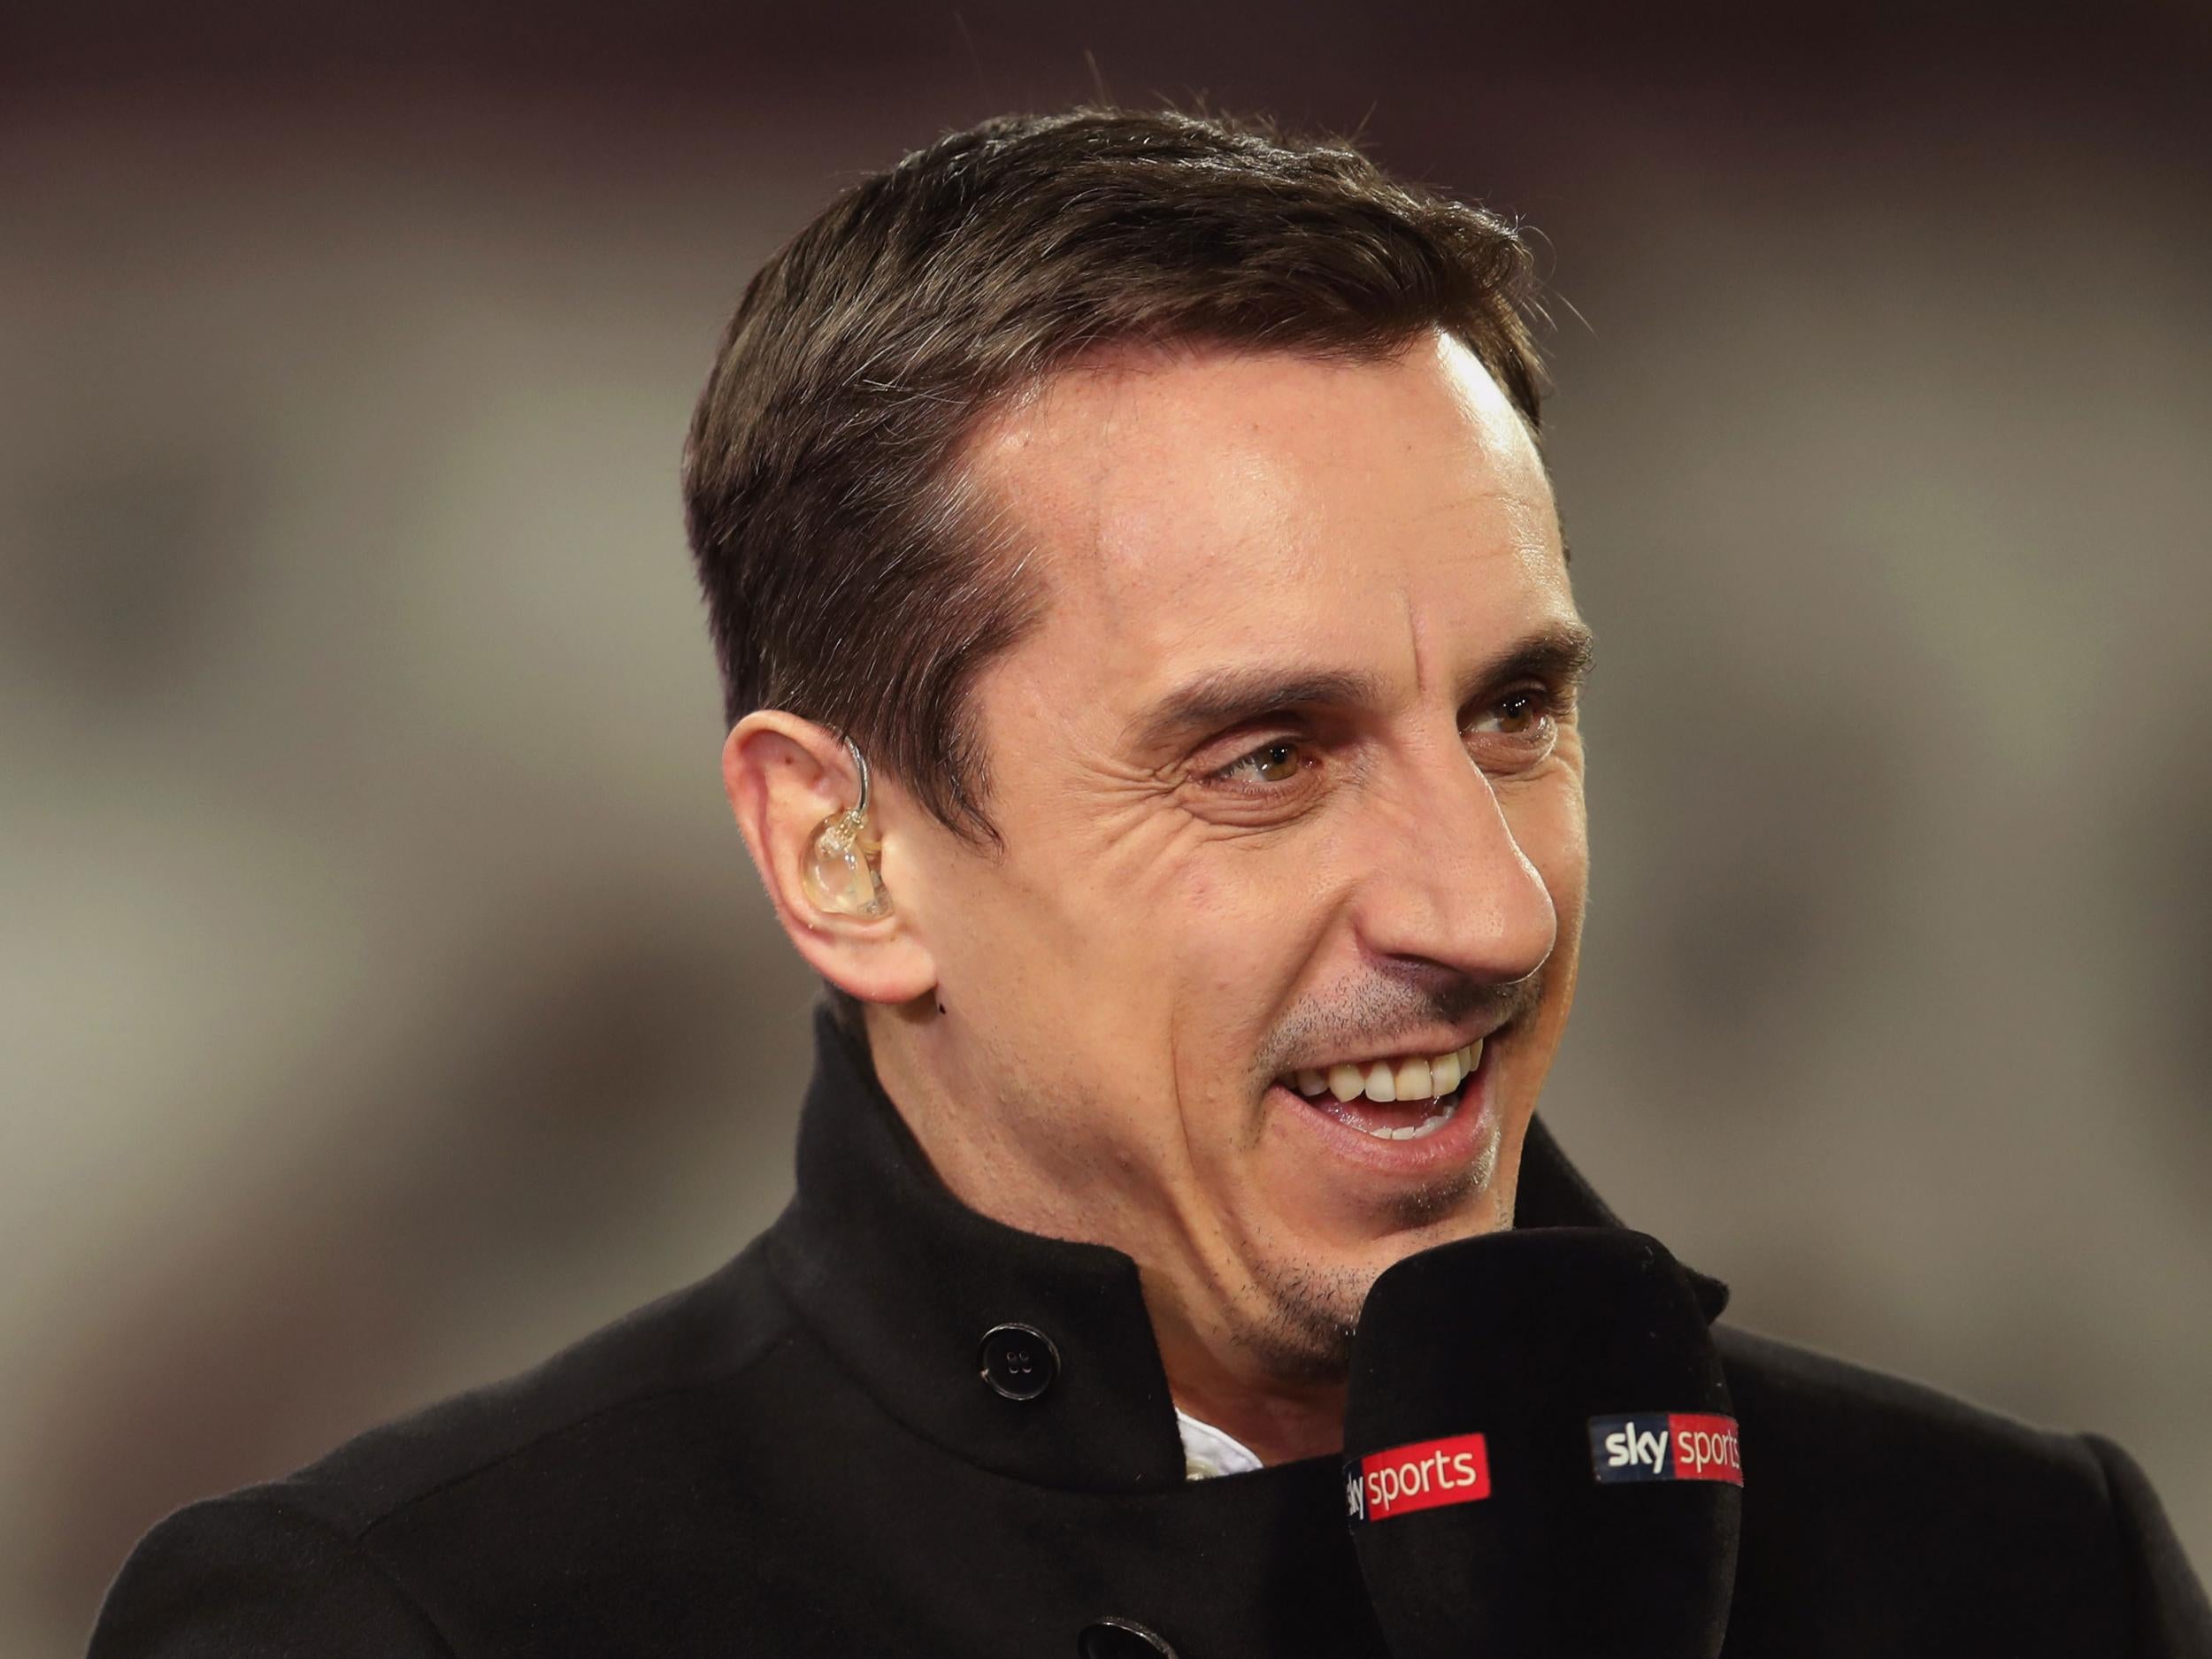 Gary Neville believes the title race is a two-horse race between the Manchester clubs